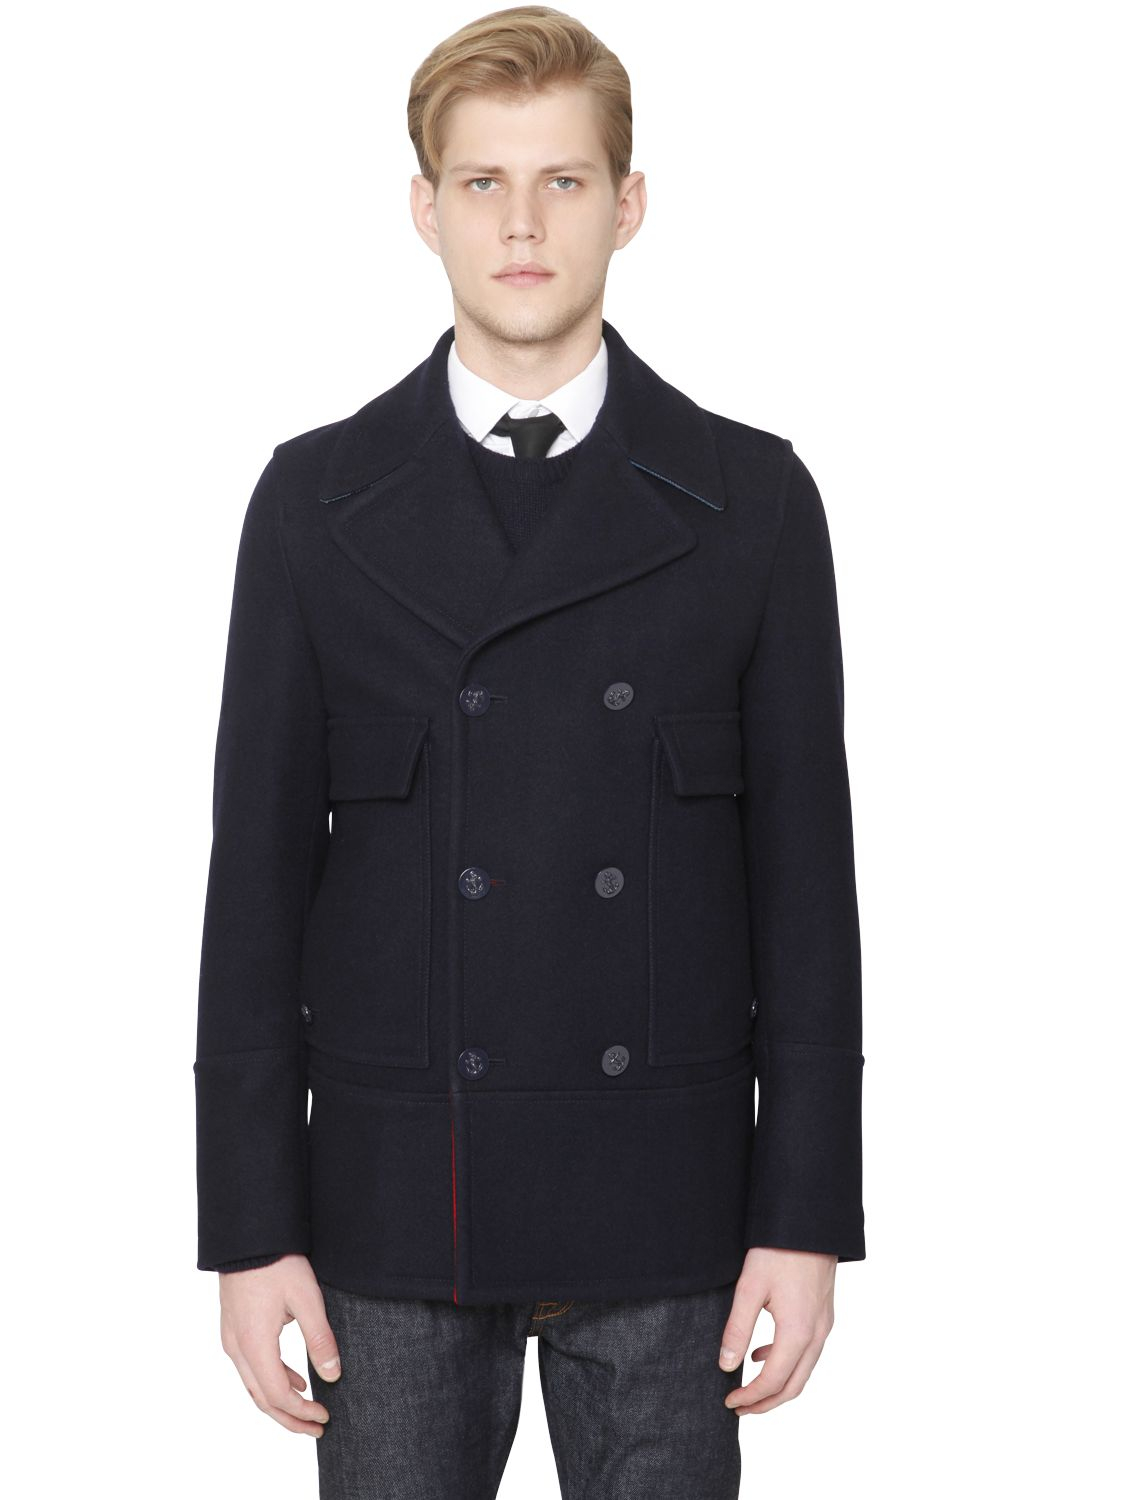 Valentino English Wool Peacoat in Blue for Men - Lyst